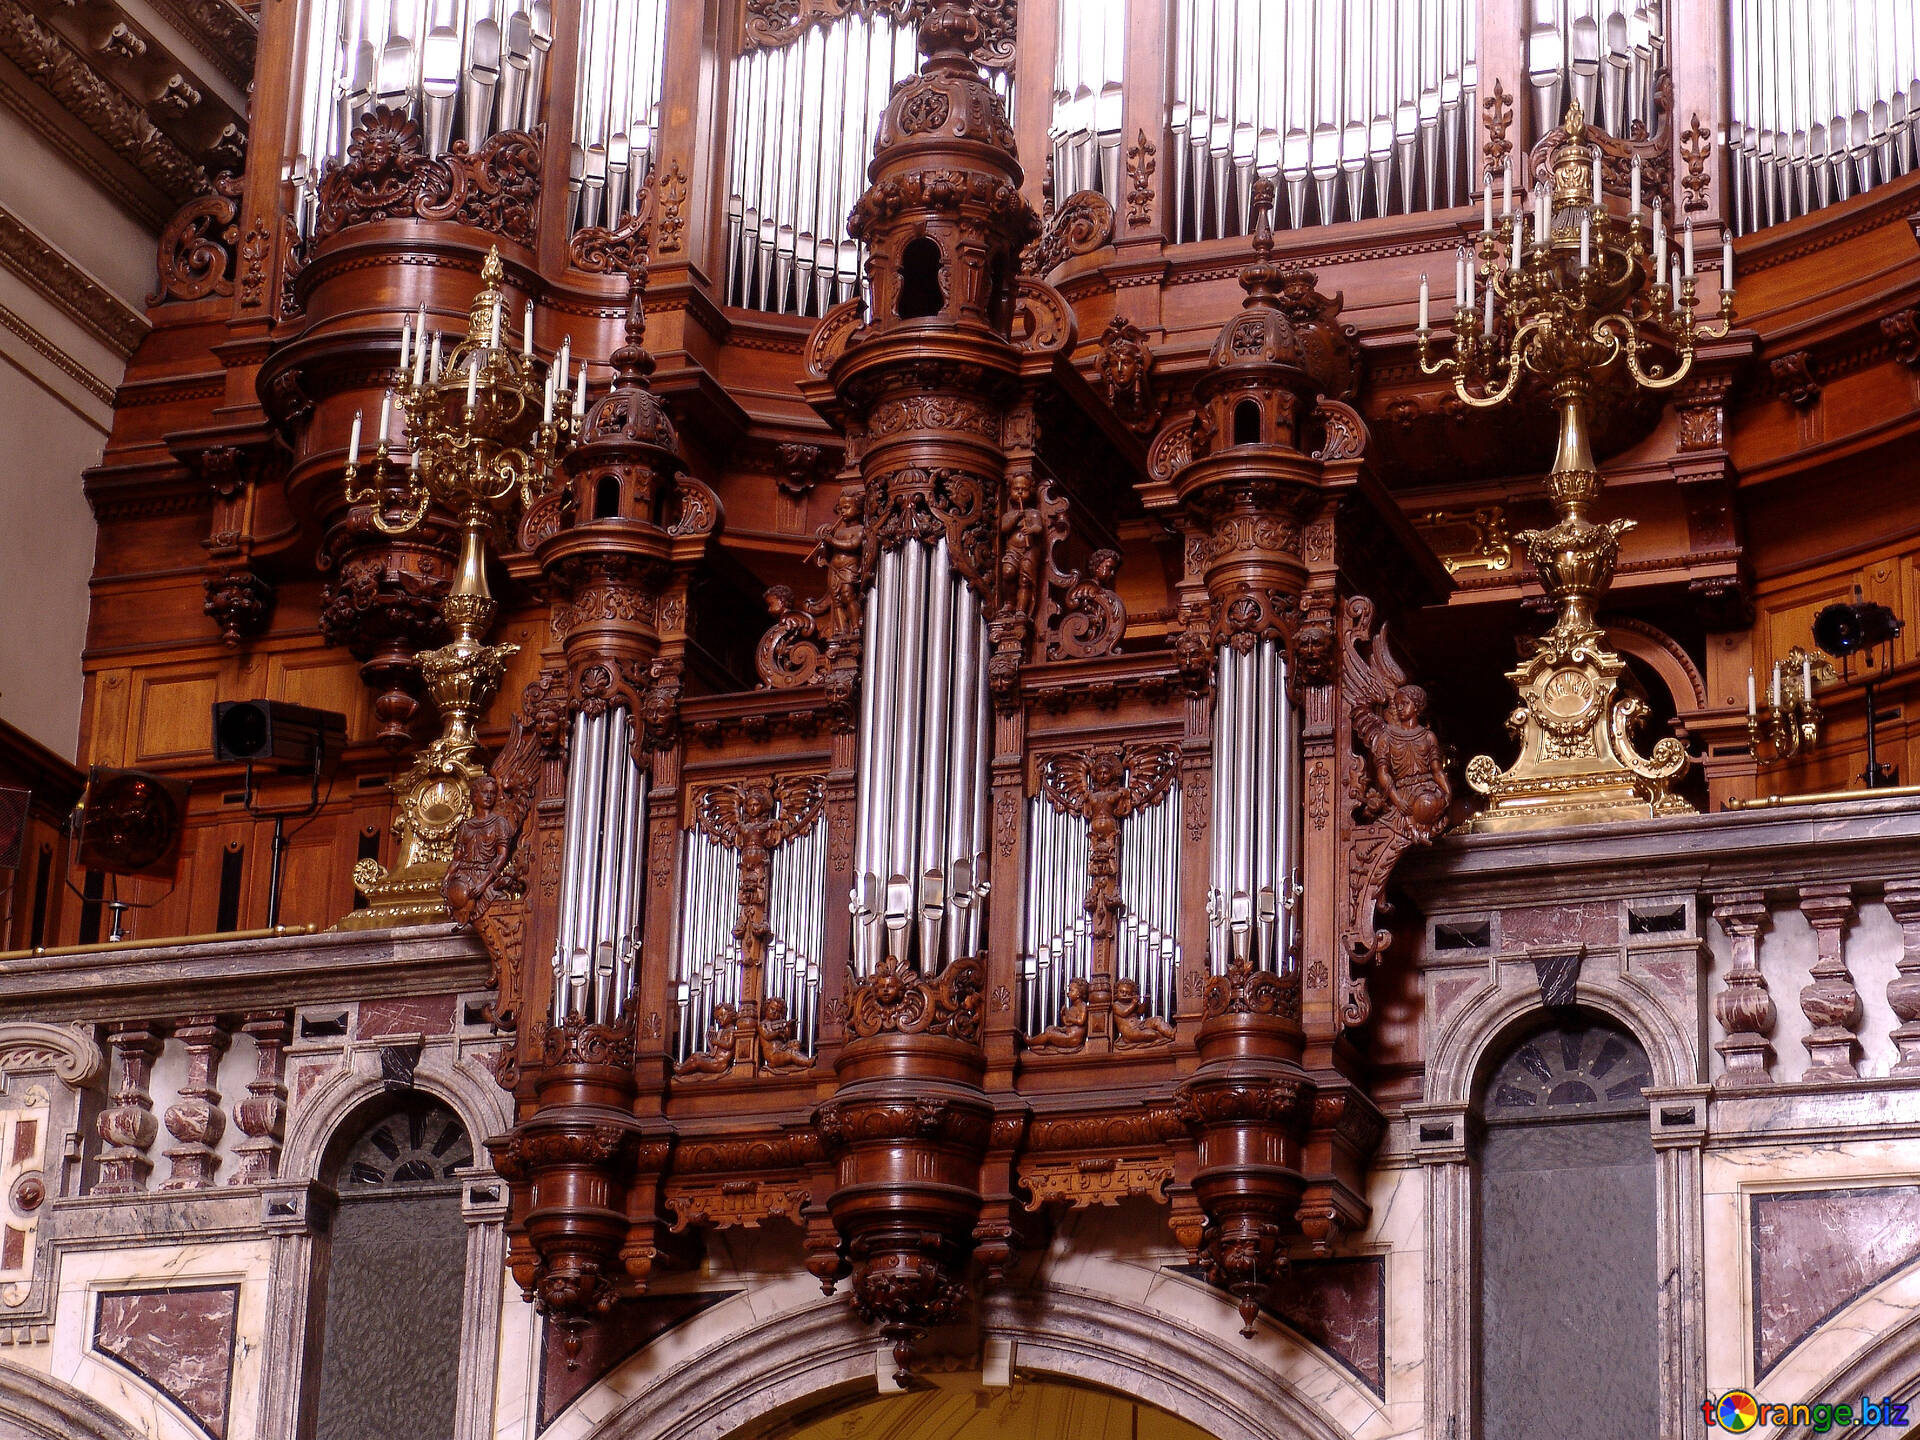 1920x1440 Musical instruments pipe organ image organ images music &acirc;&#132;&#150; 7441 | ~ free pics on cc-by license